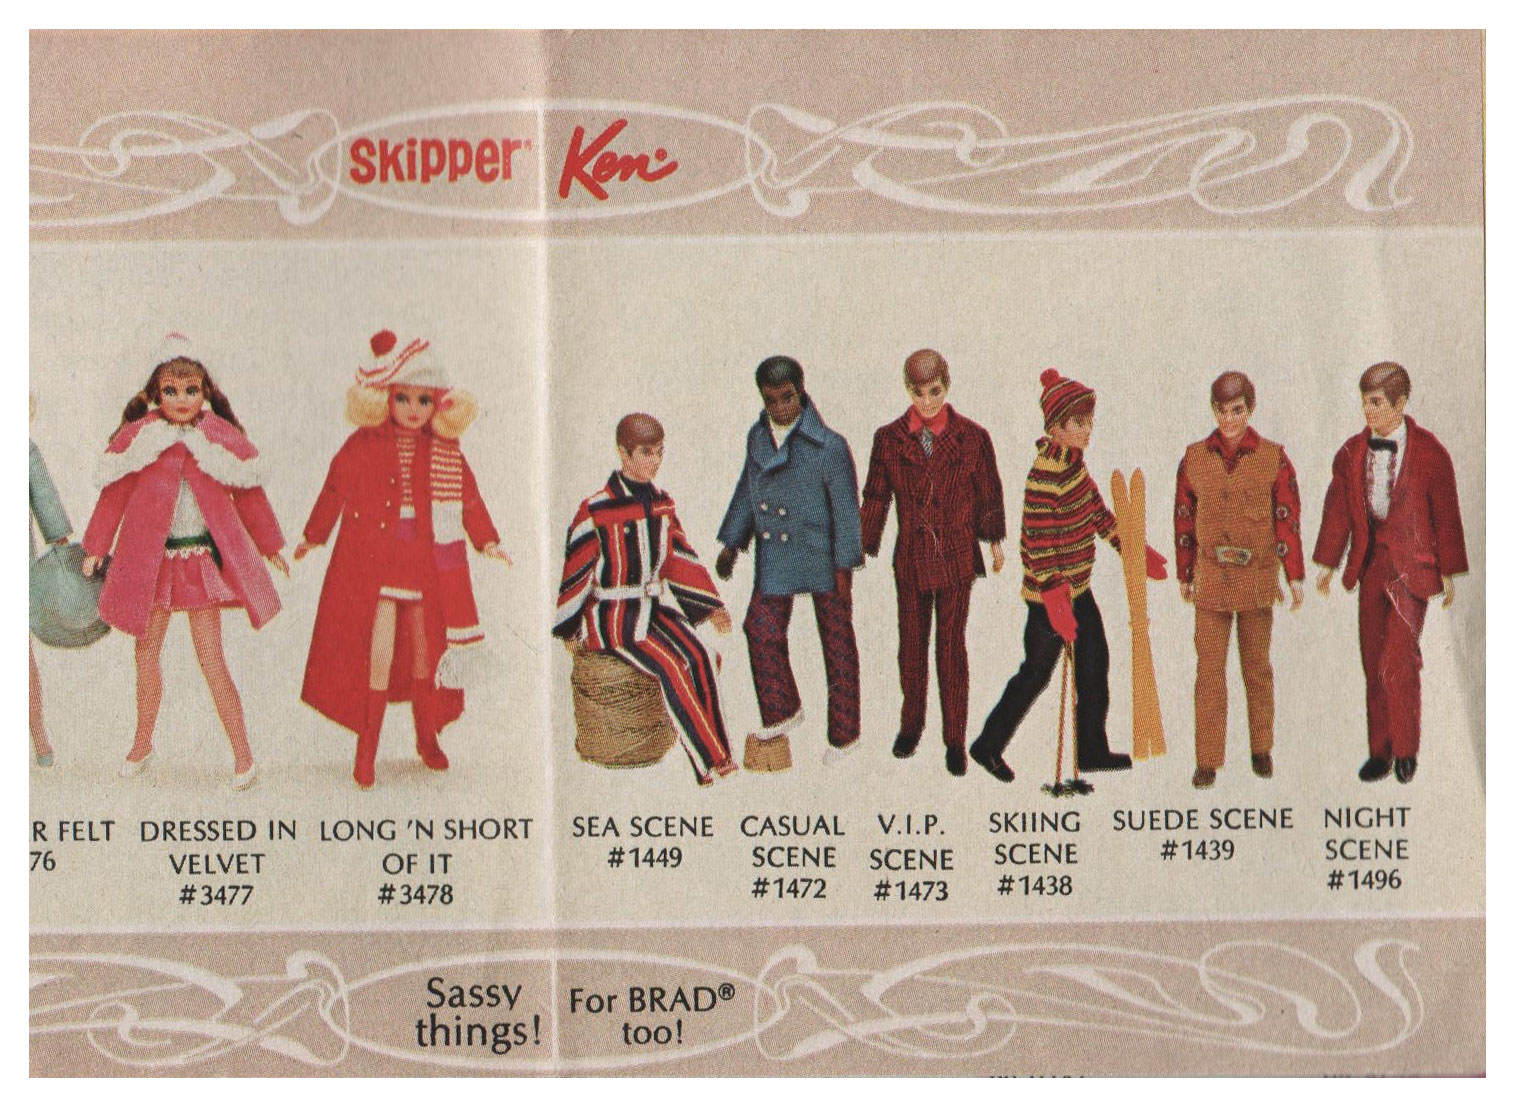 From 1971-72 Barbie booklet